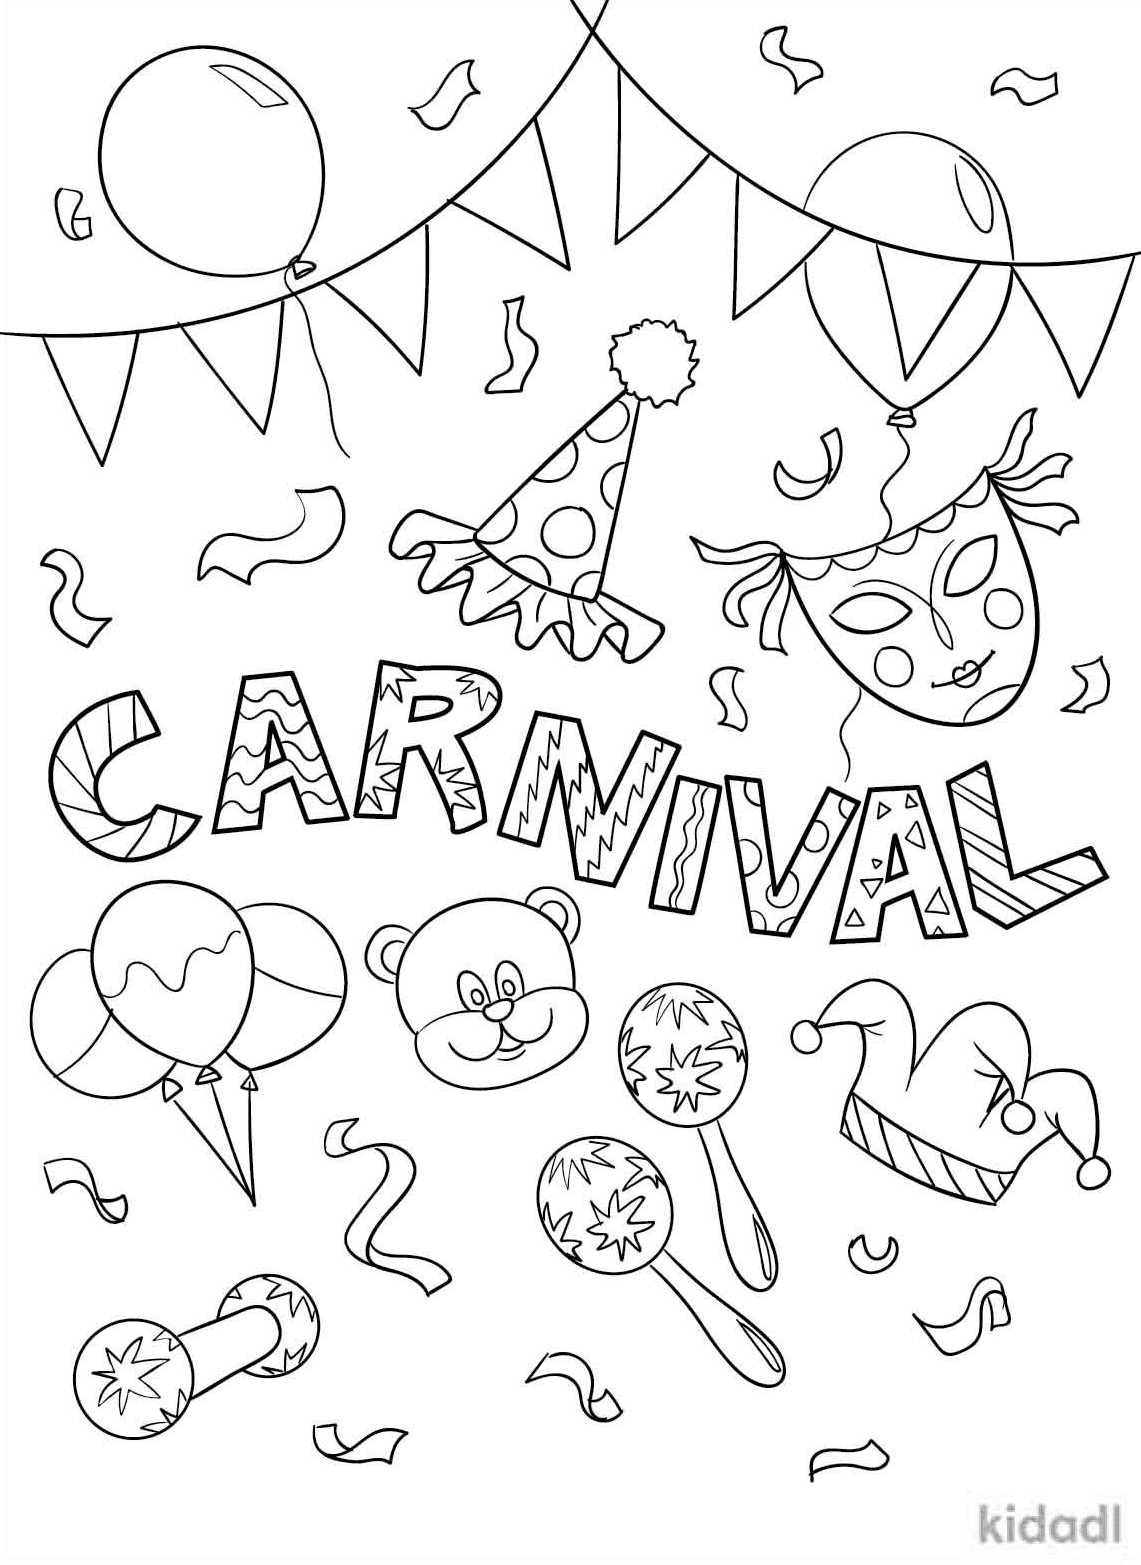 carnival-free-printable-coloring-pages-carnival-coloring-pages